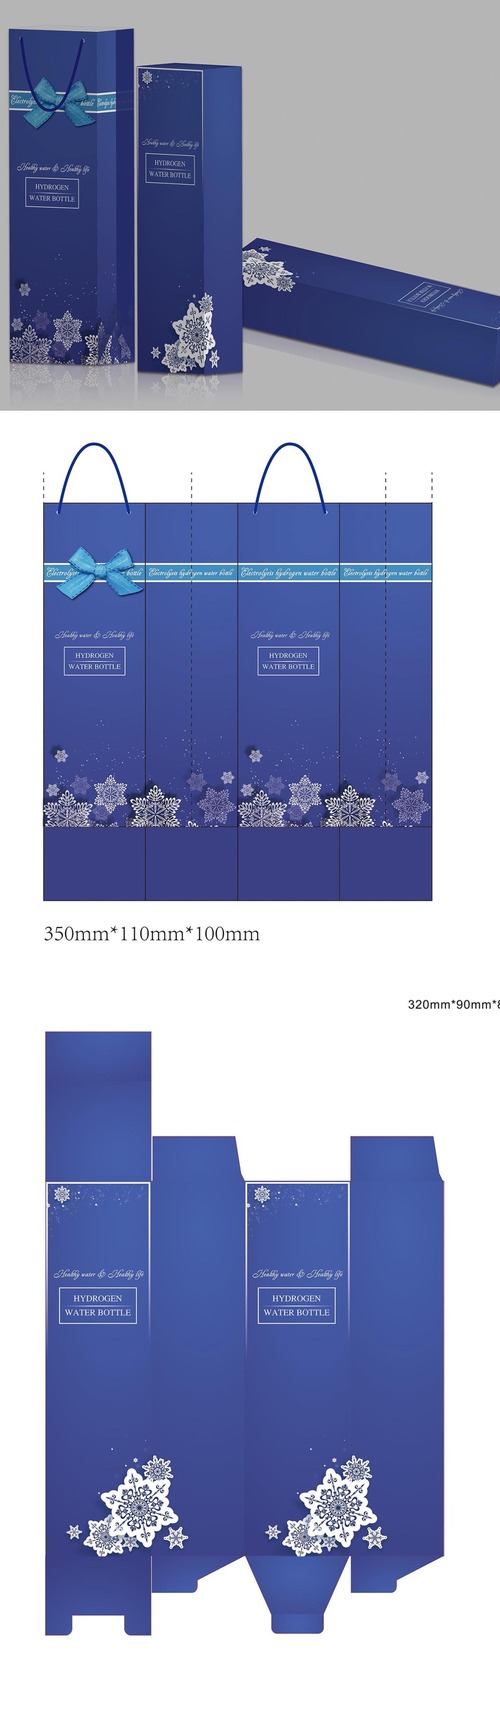 Blue gift box packaging material vector